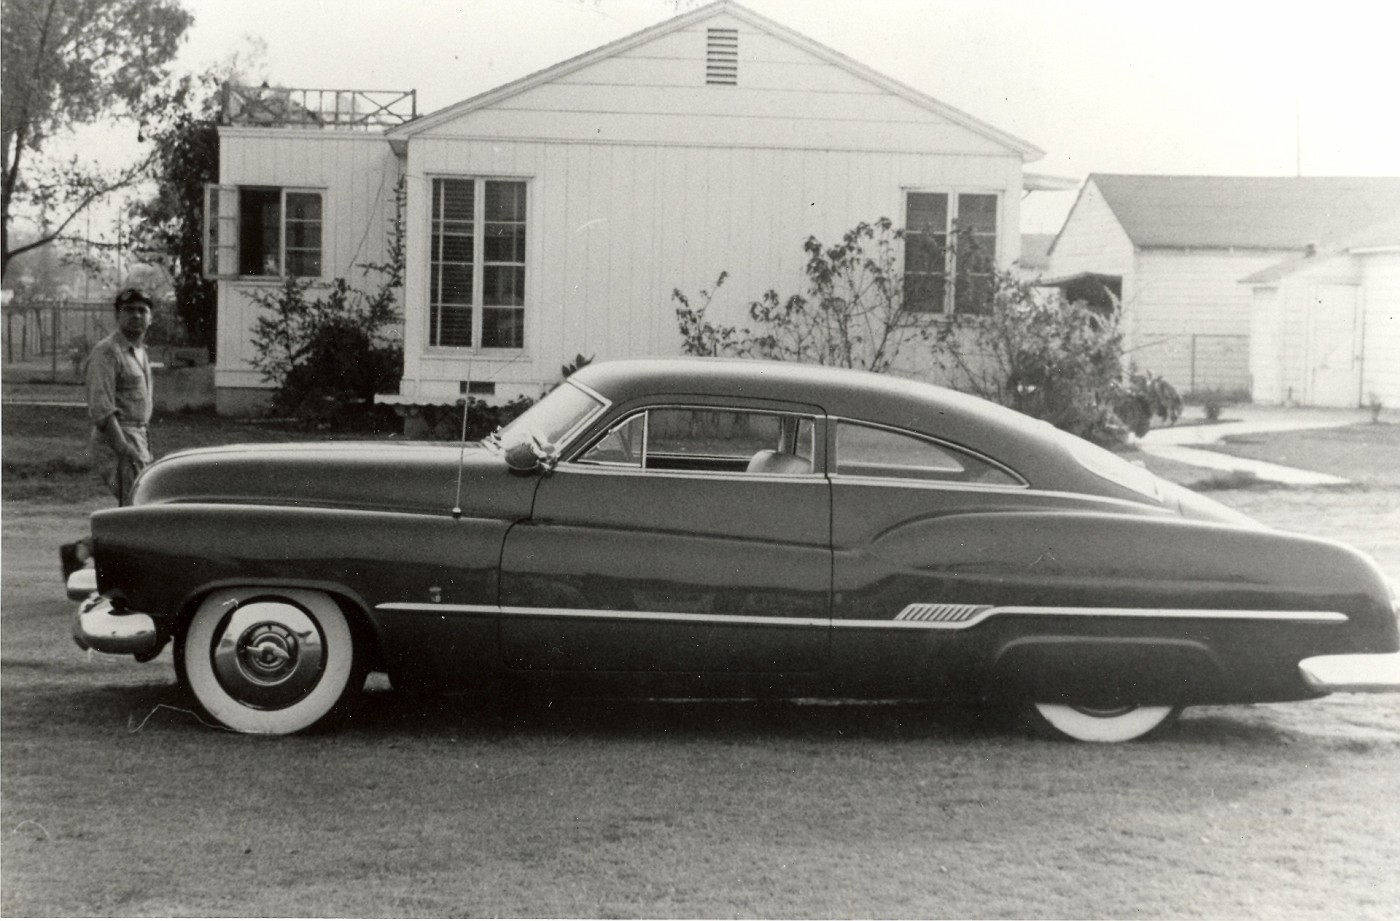 Sam Barris 1950 Buick There are others that come close but if I have to